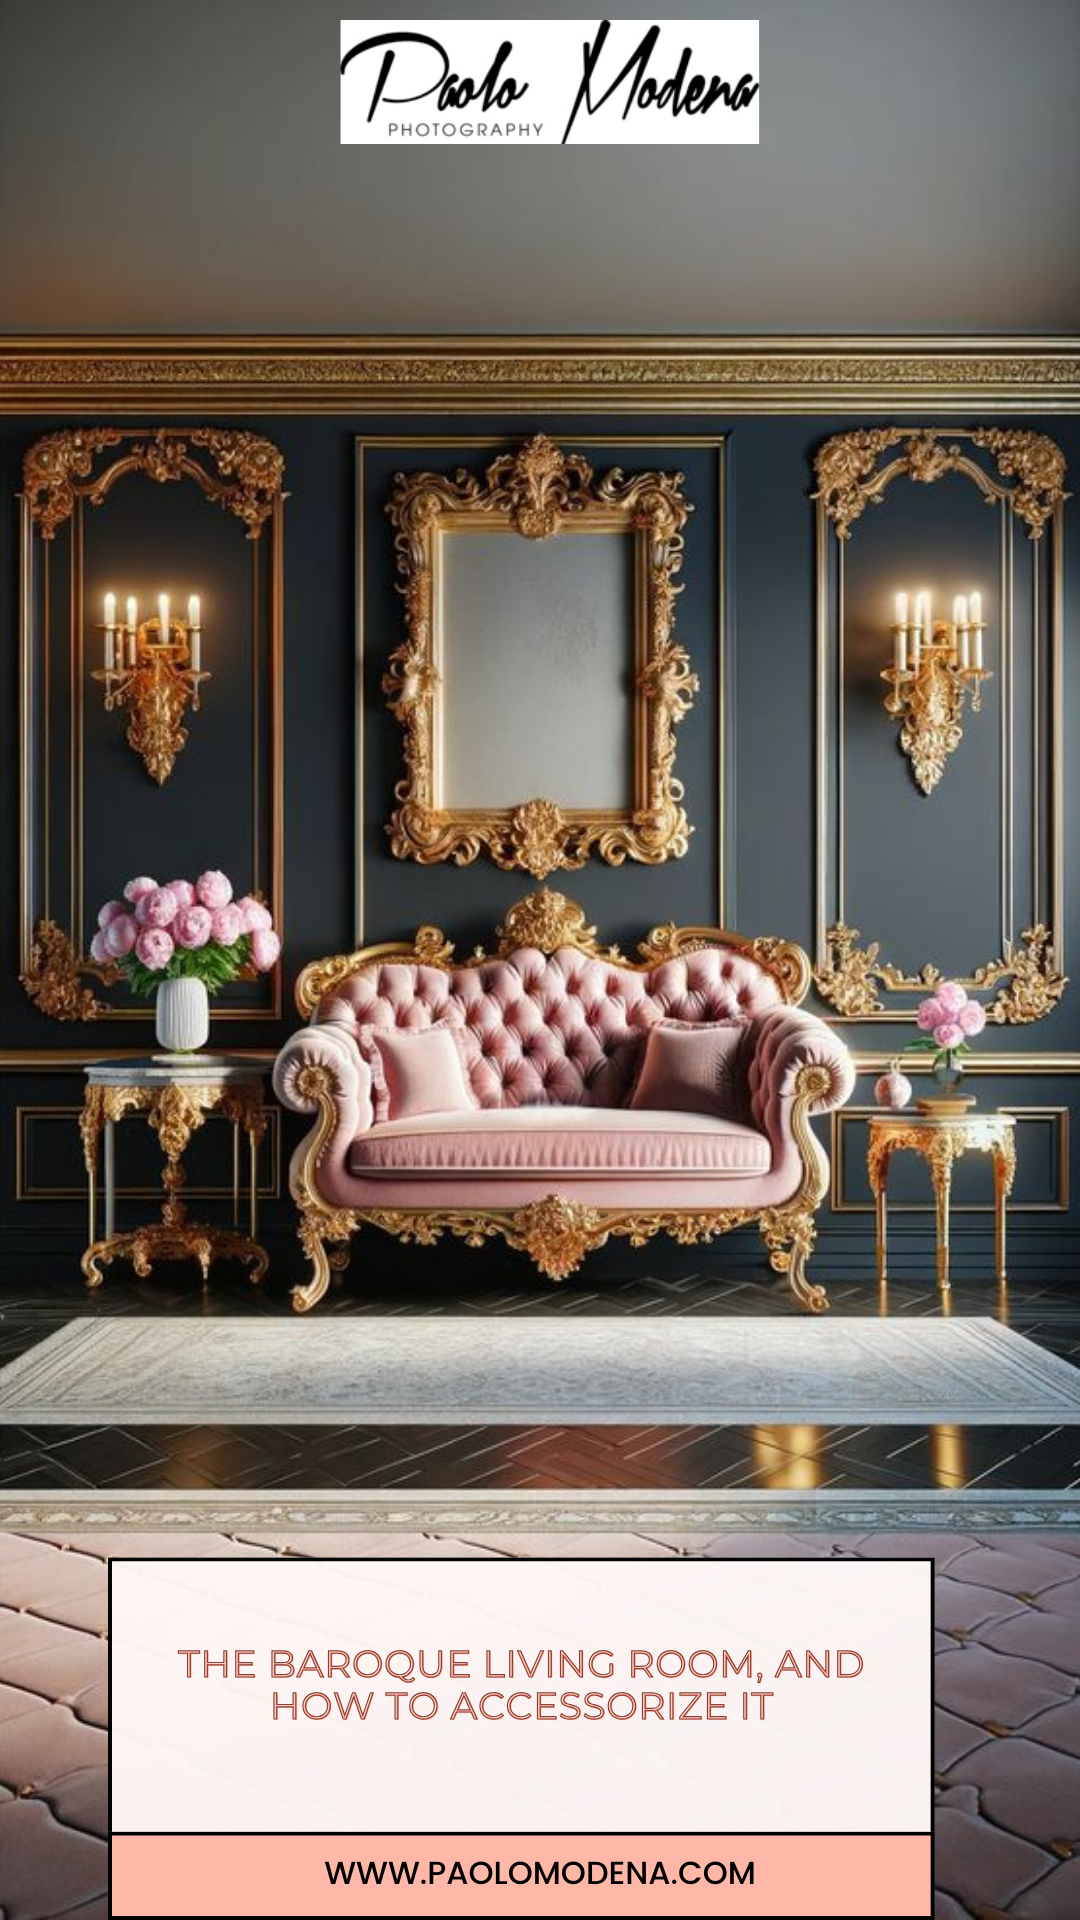 Baroque Furniture Elegant and Ornate Furnishings from the Baroque Era